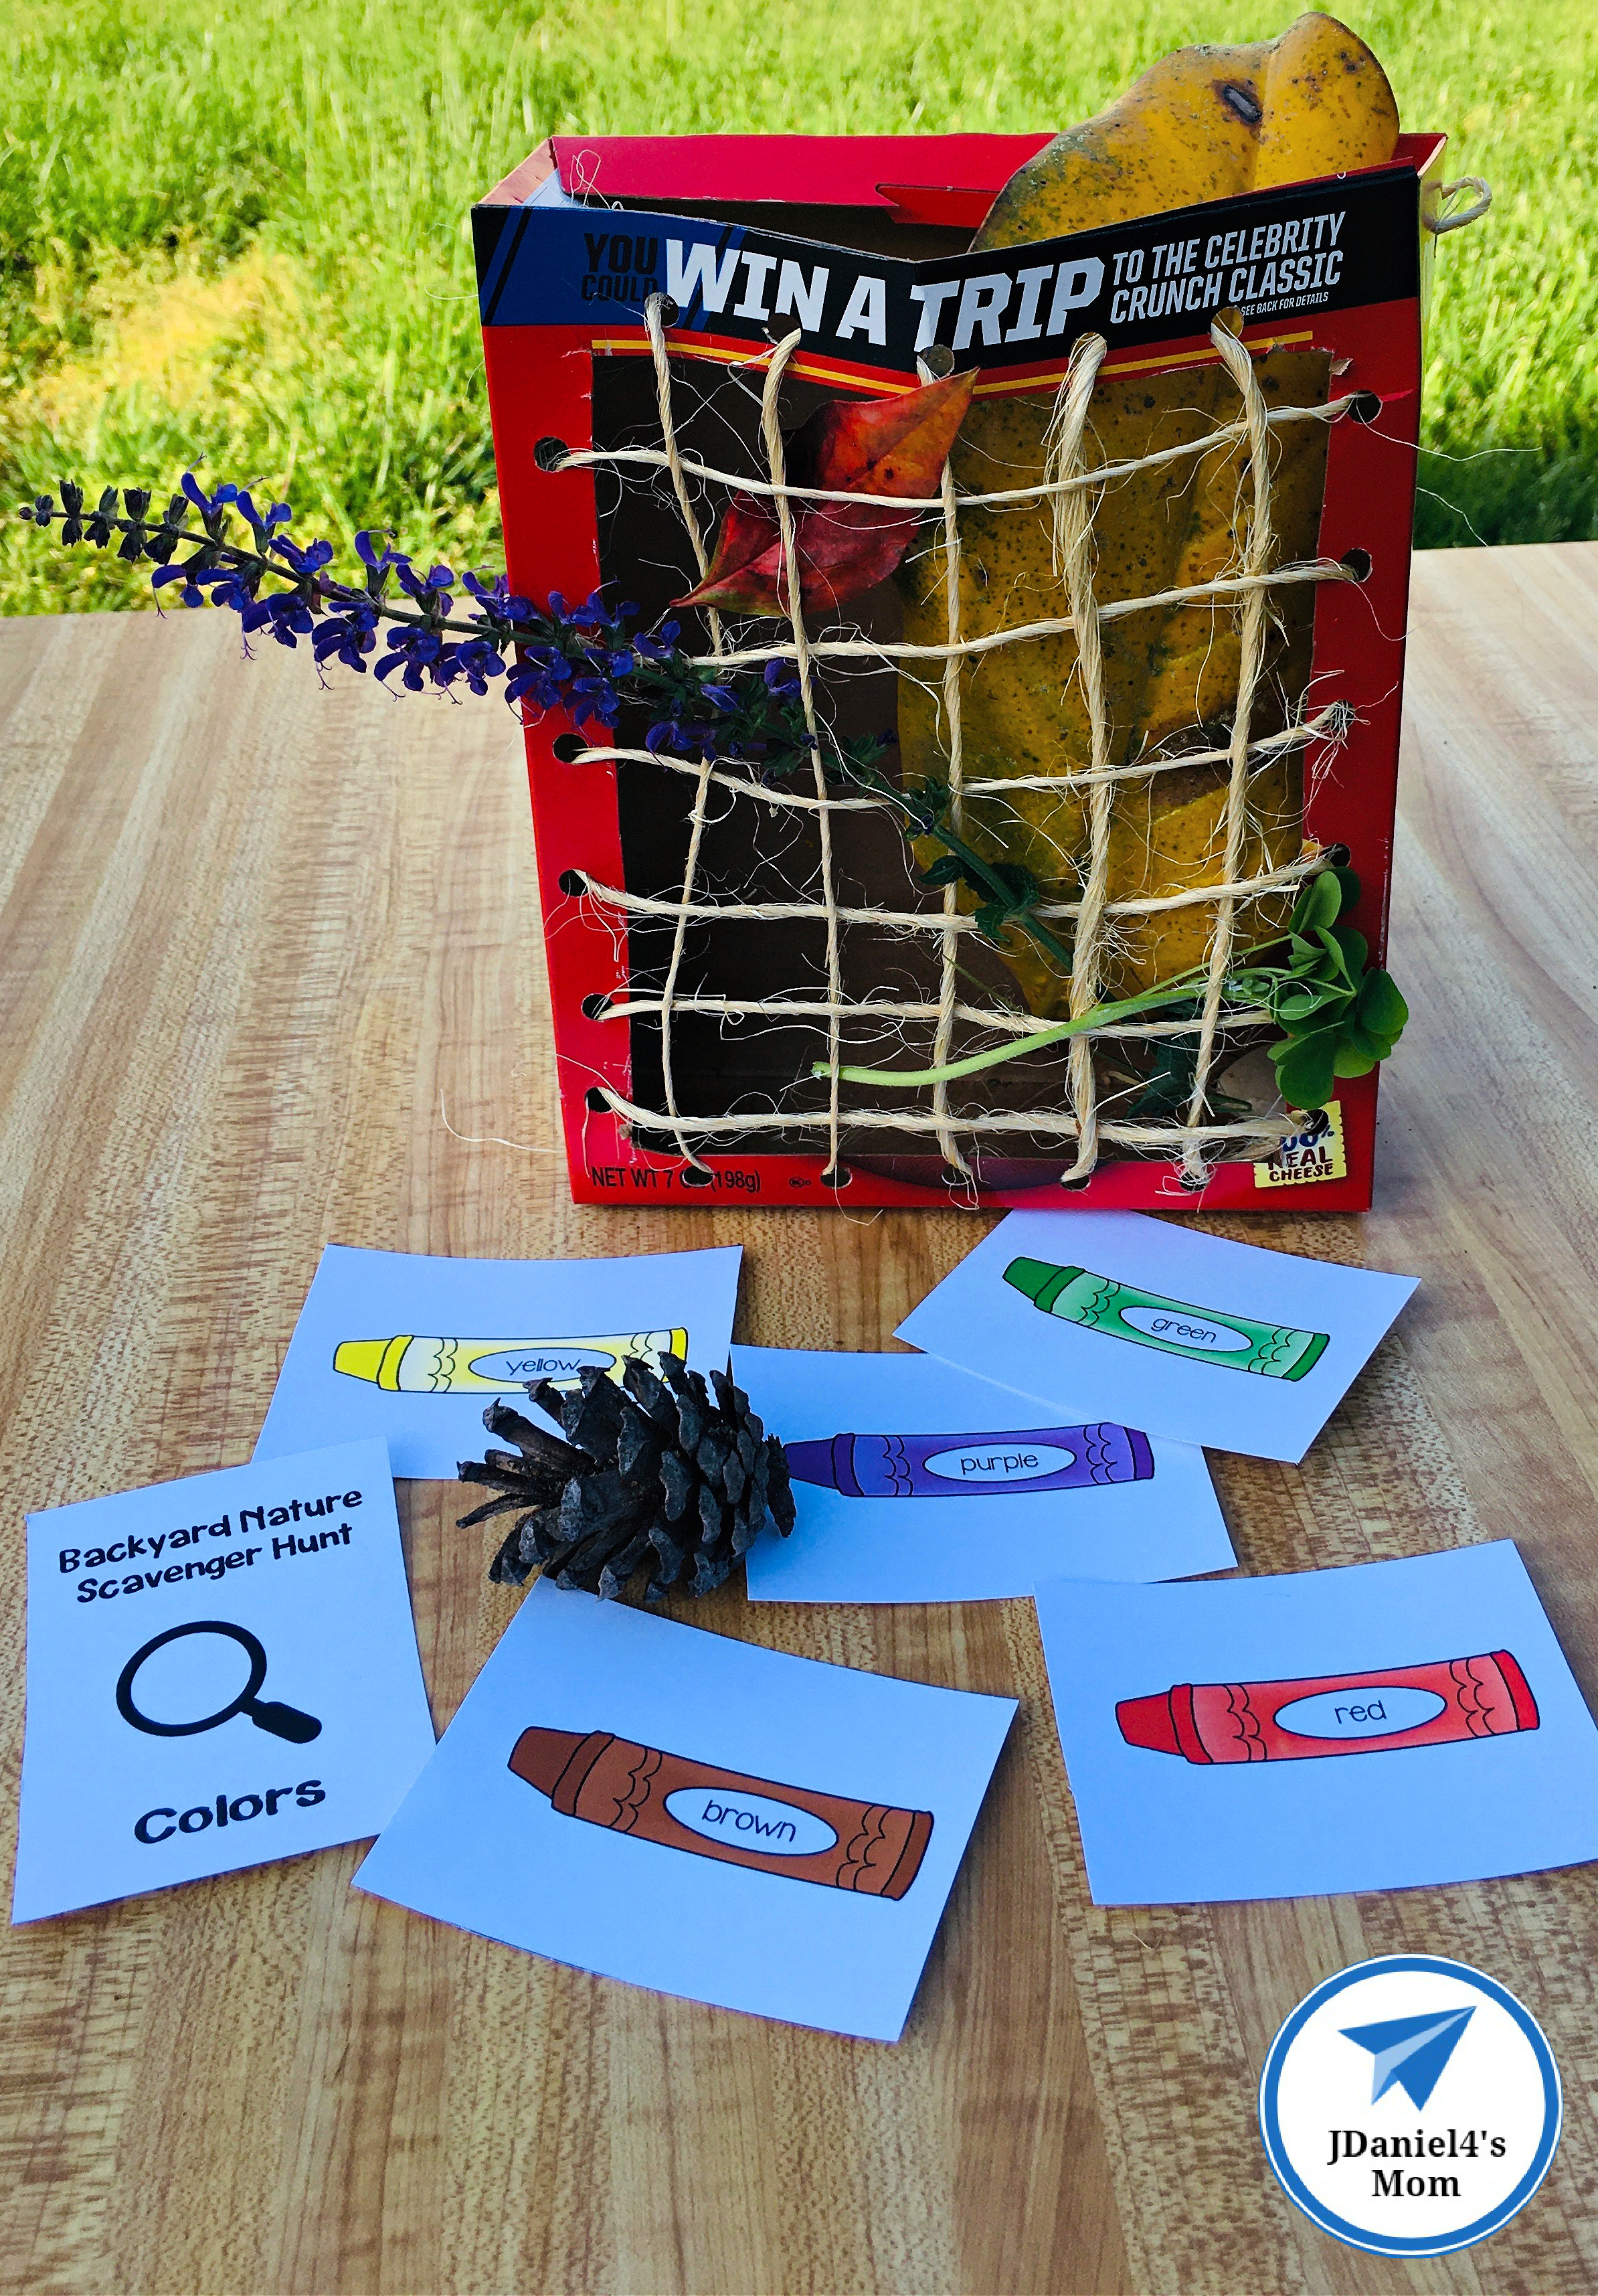 Making an Outdoor Nature Scavenger Hunt Collecting Box 